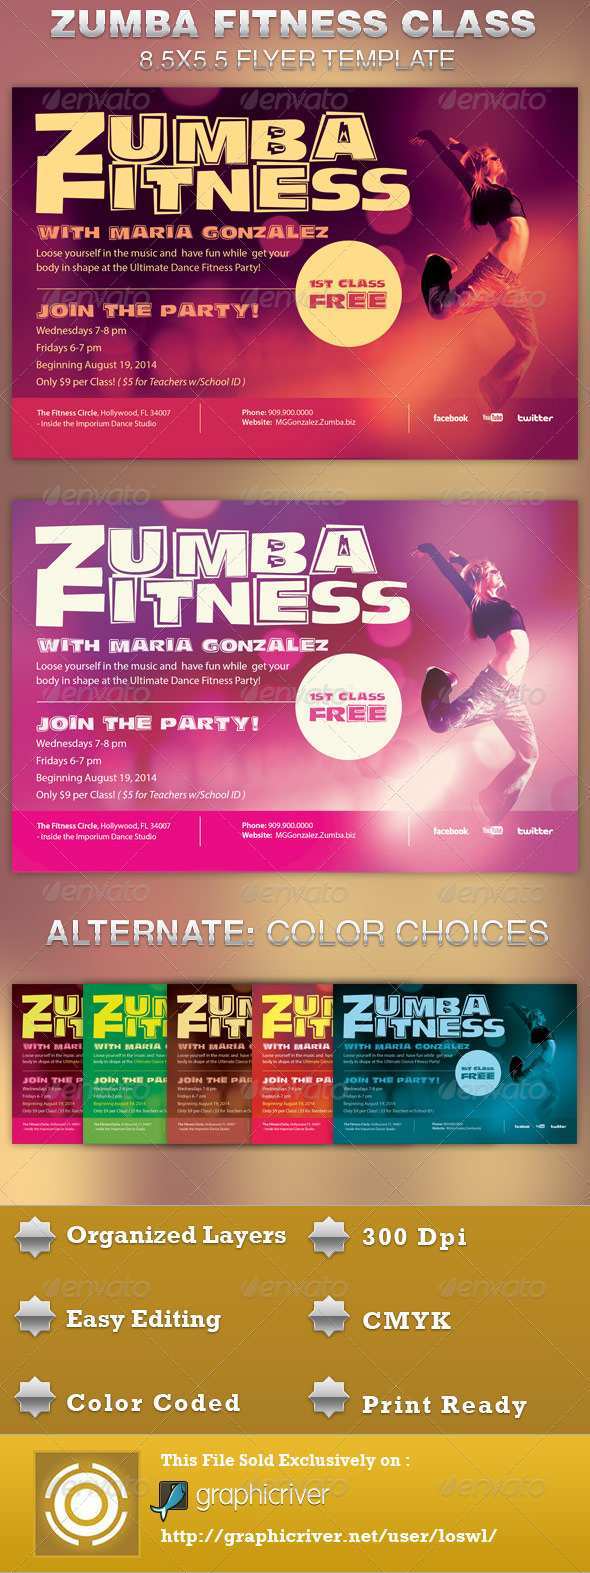 13 Online Zumba Party Invitation Template Layouts by Zumba Party